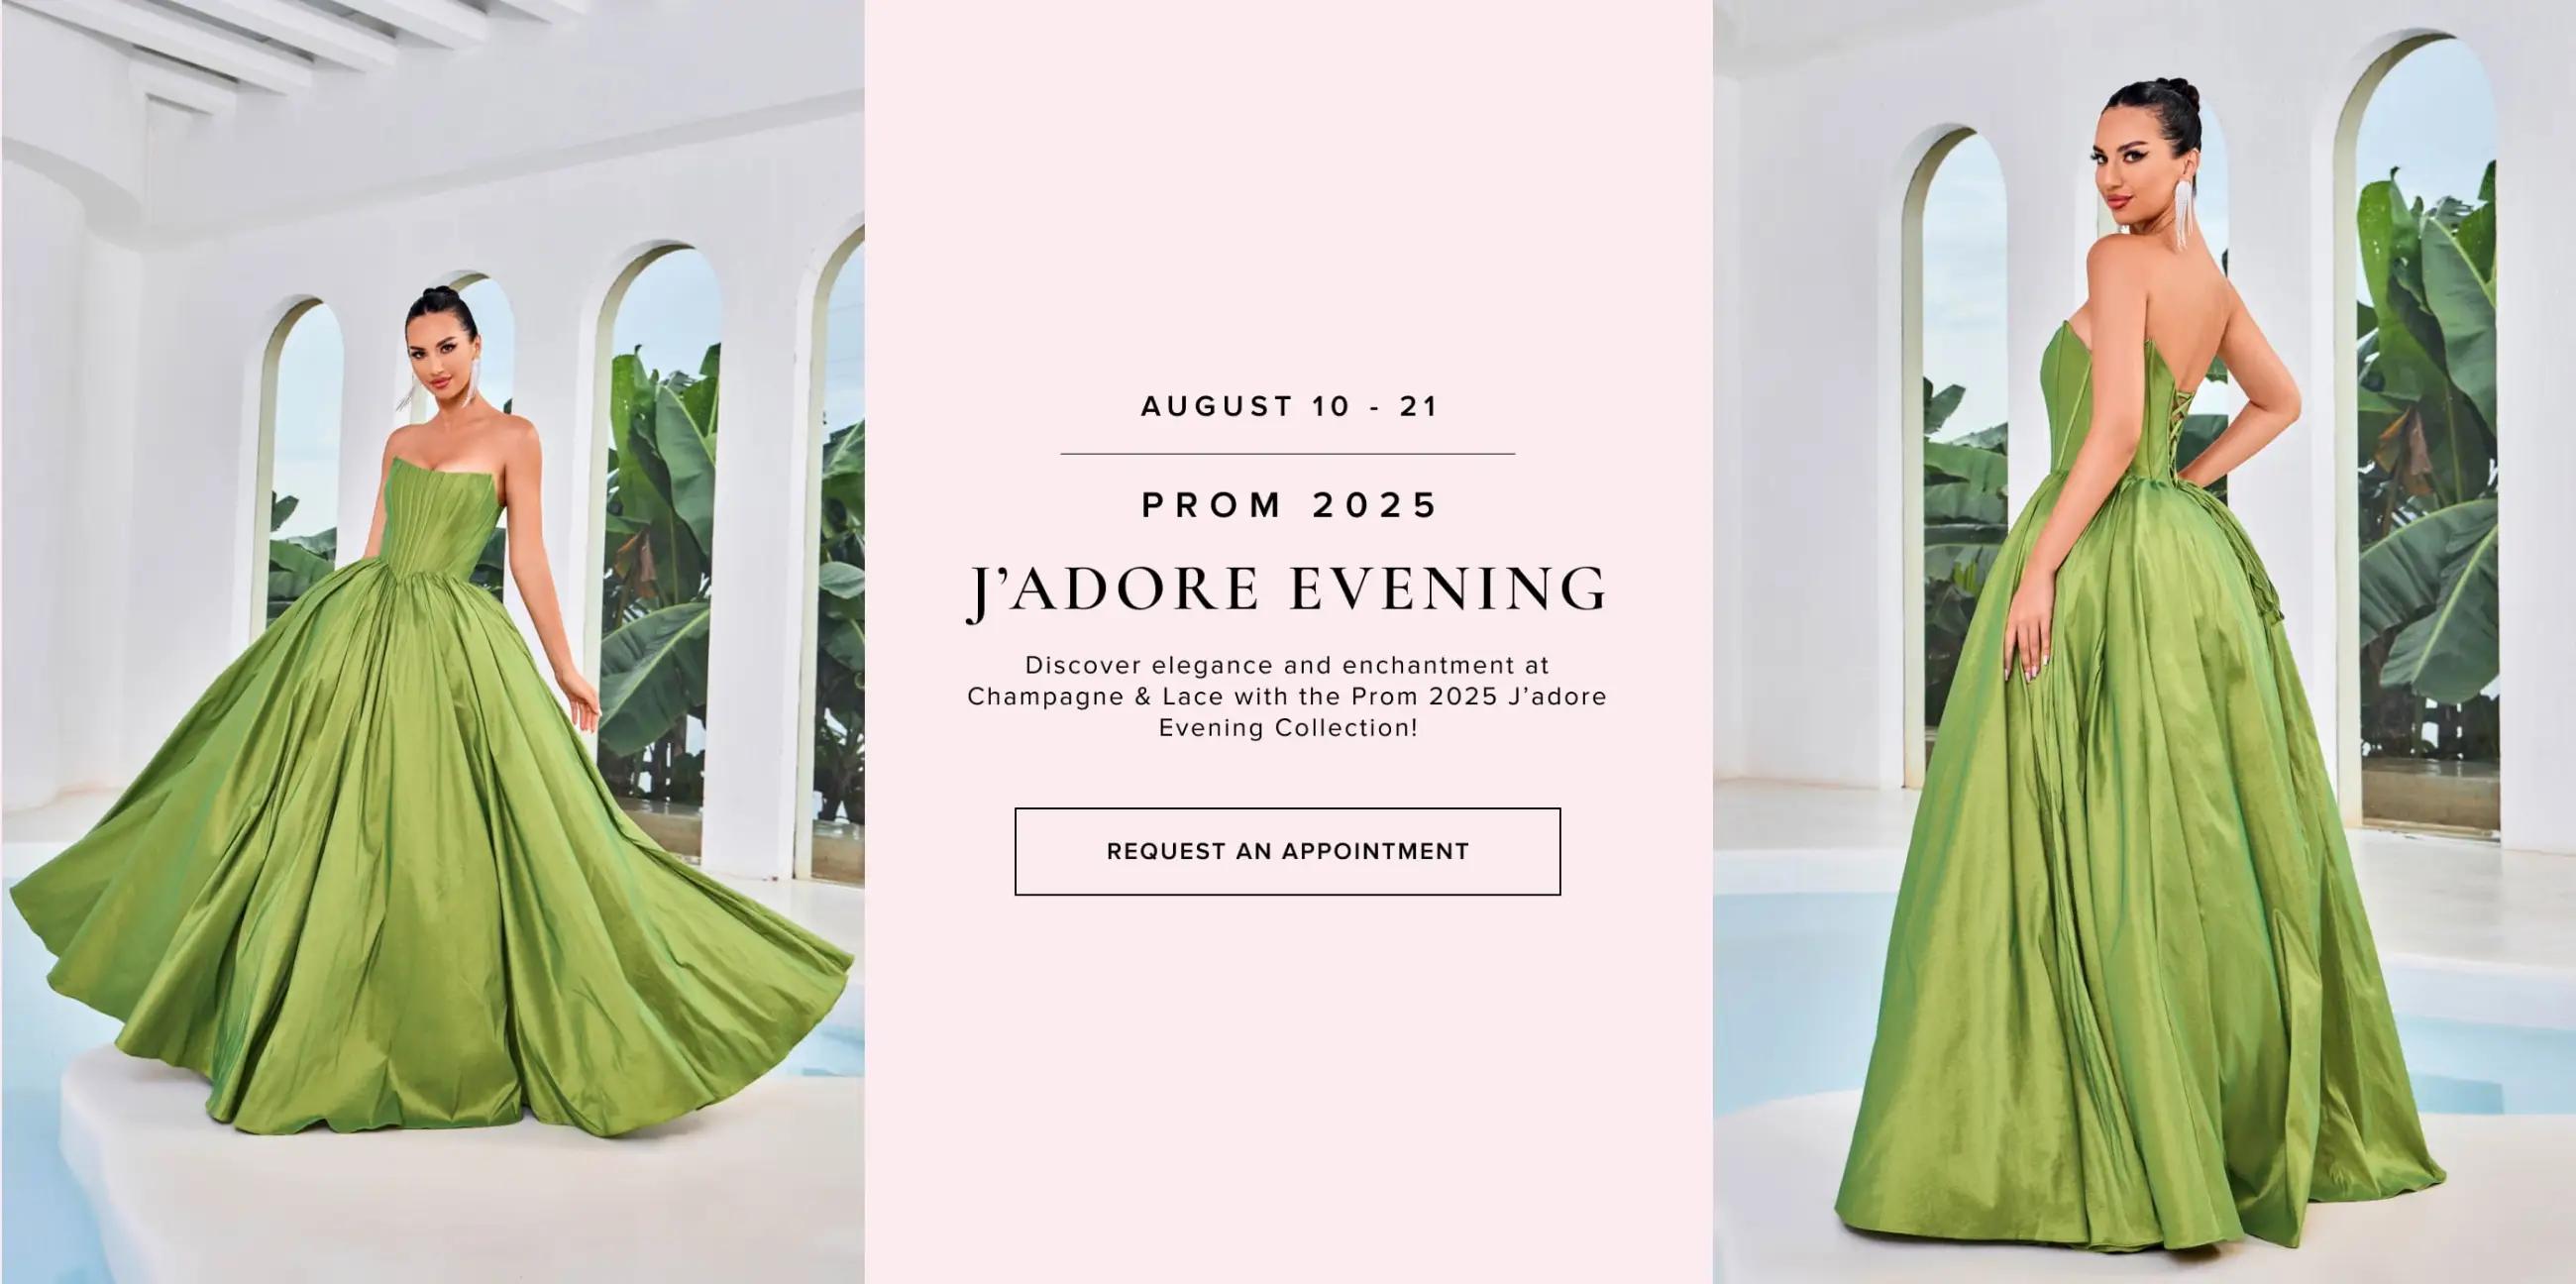 picture promoting j'adore evening